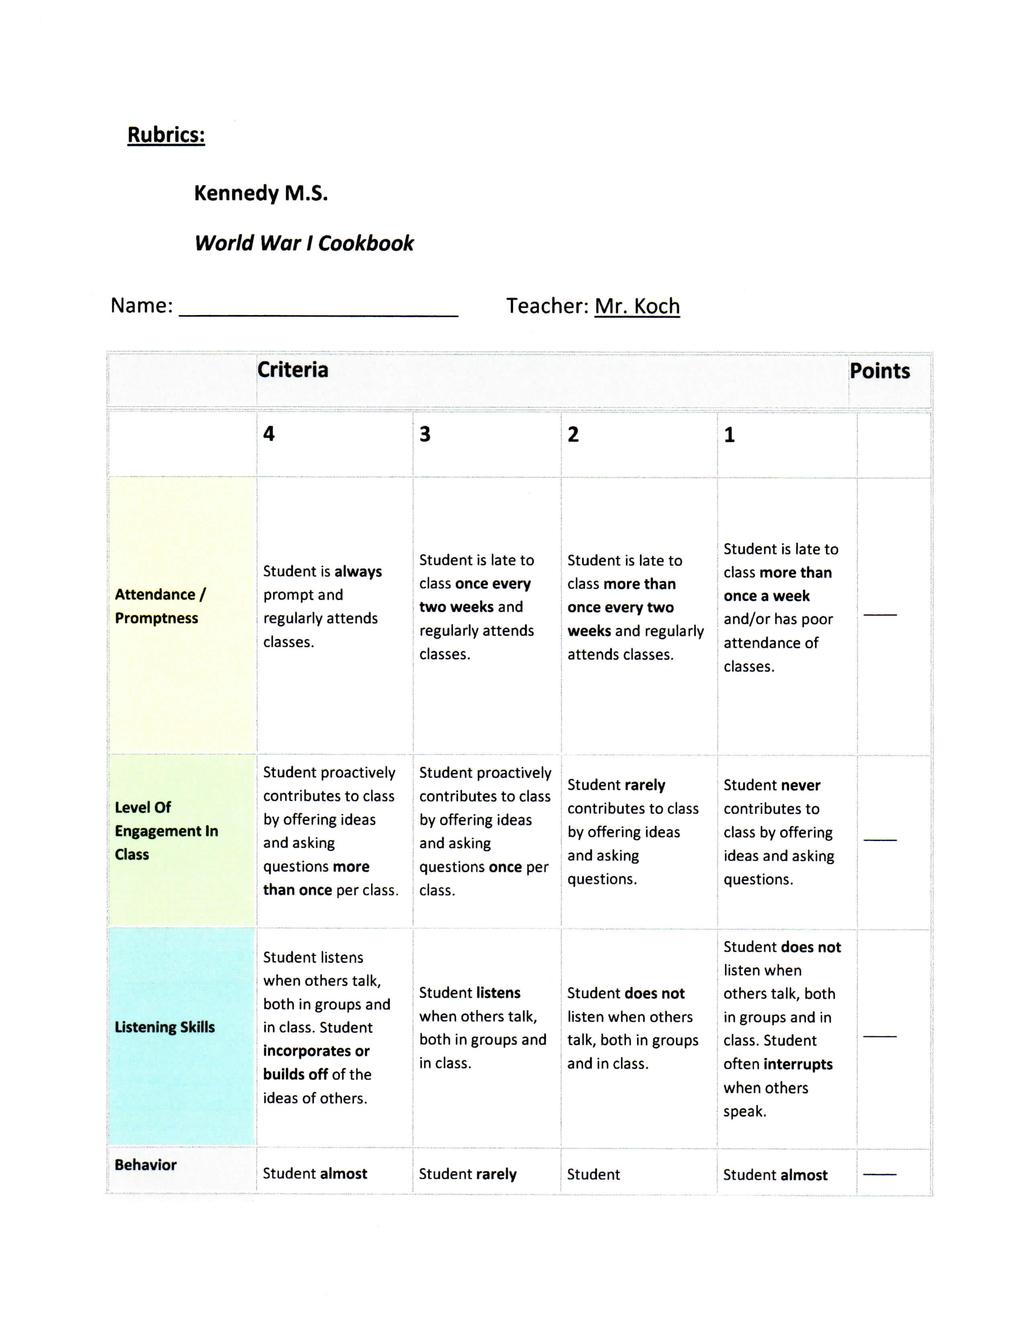 Rubrics: Kennedy IVI.S. World War I Cookbook Name: Teacher: Mr. Koch Criteria Points Attendance / Promptness Student is always prompt and regularly attends classes.